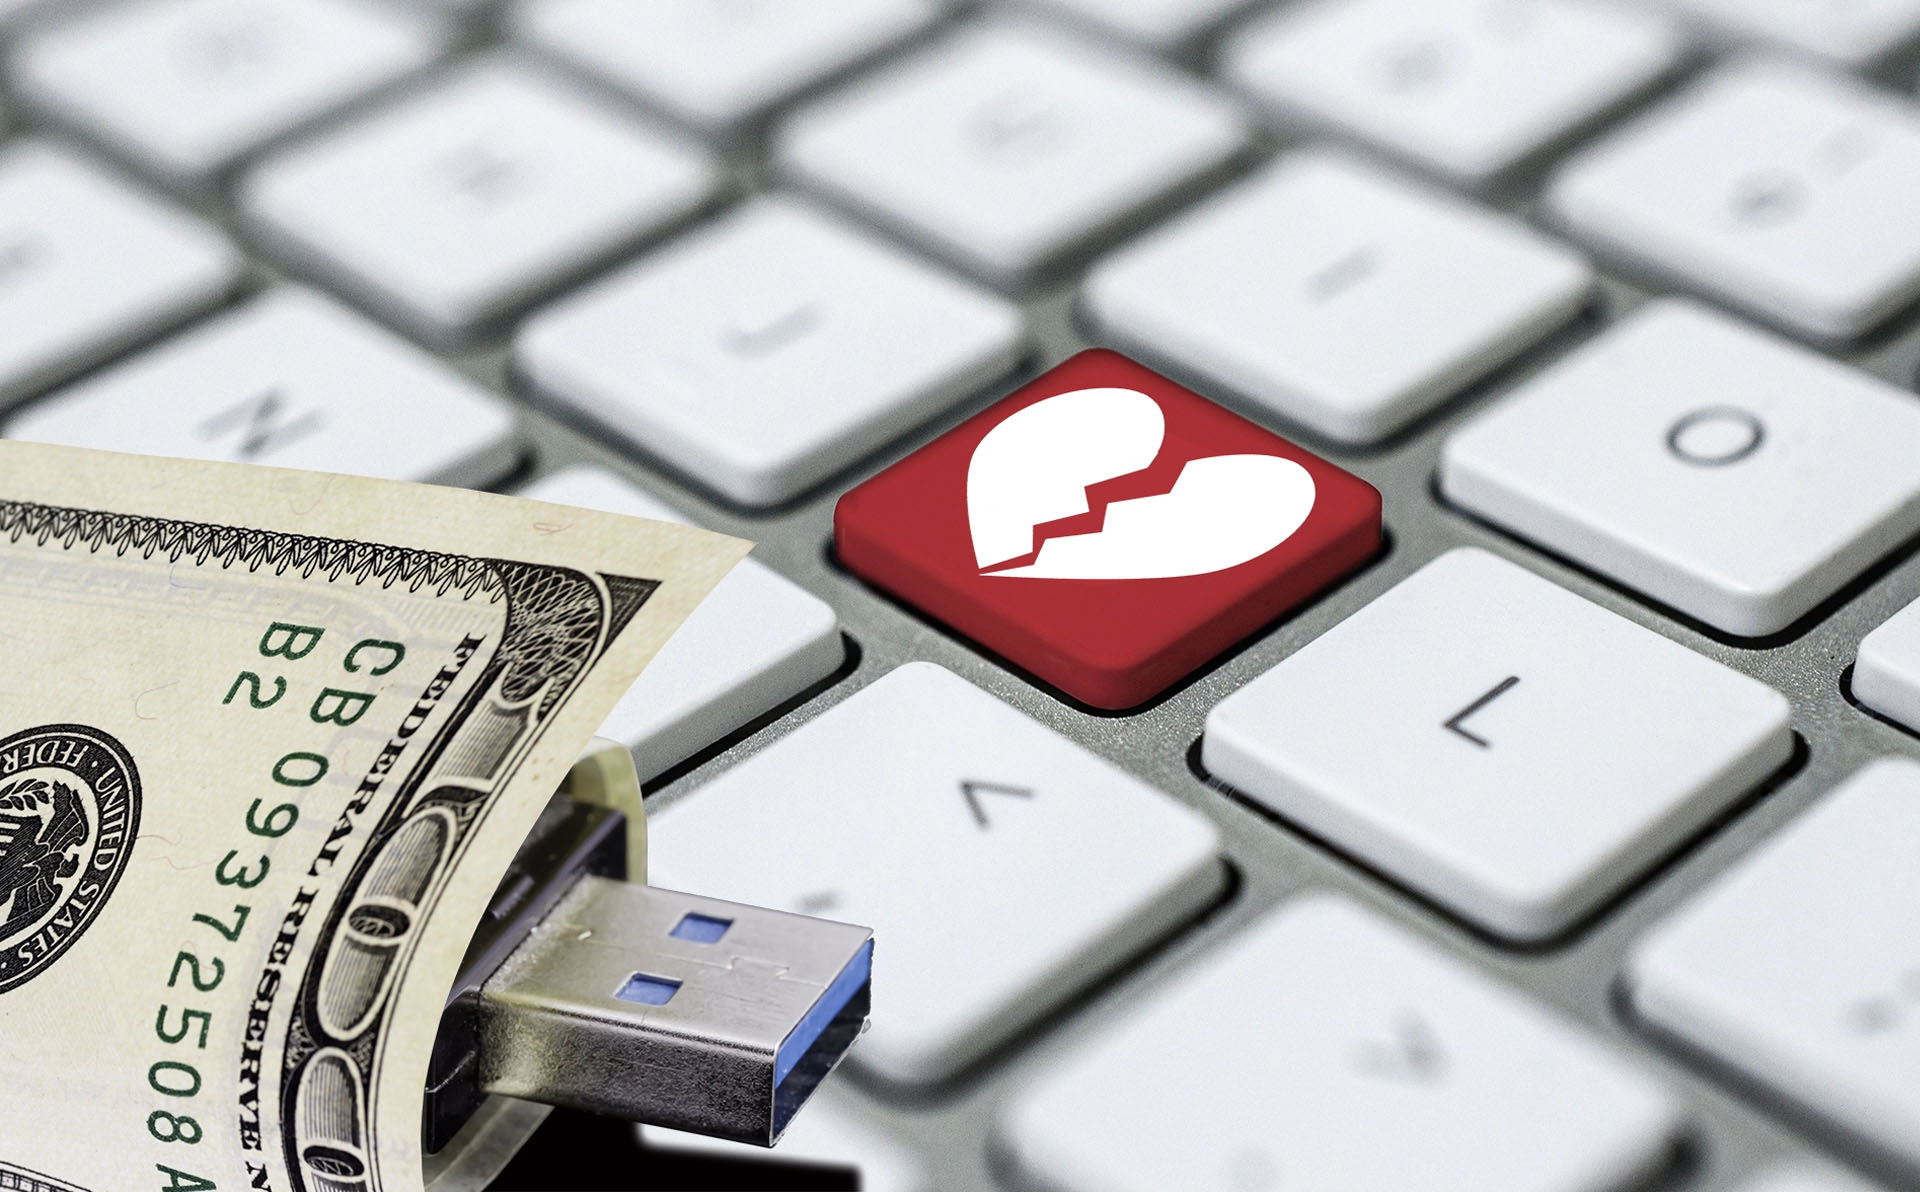 Dating or Defrauding? Protect Yourself Against Romance Scams